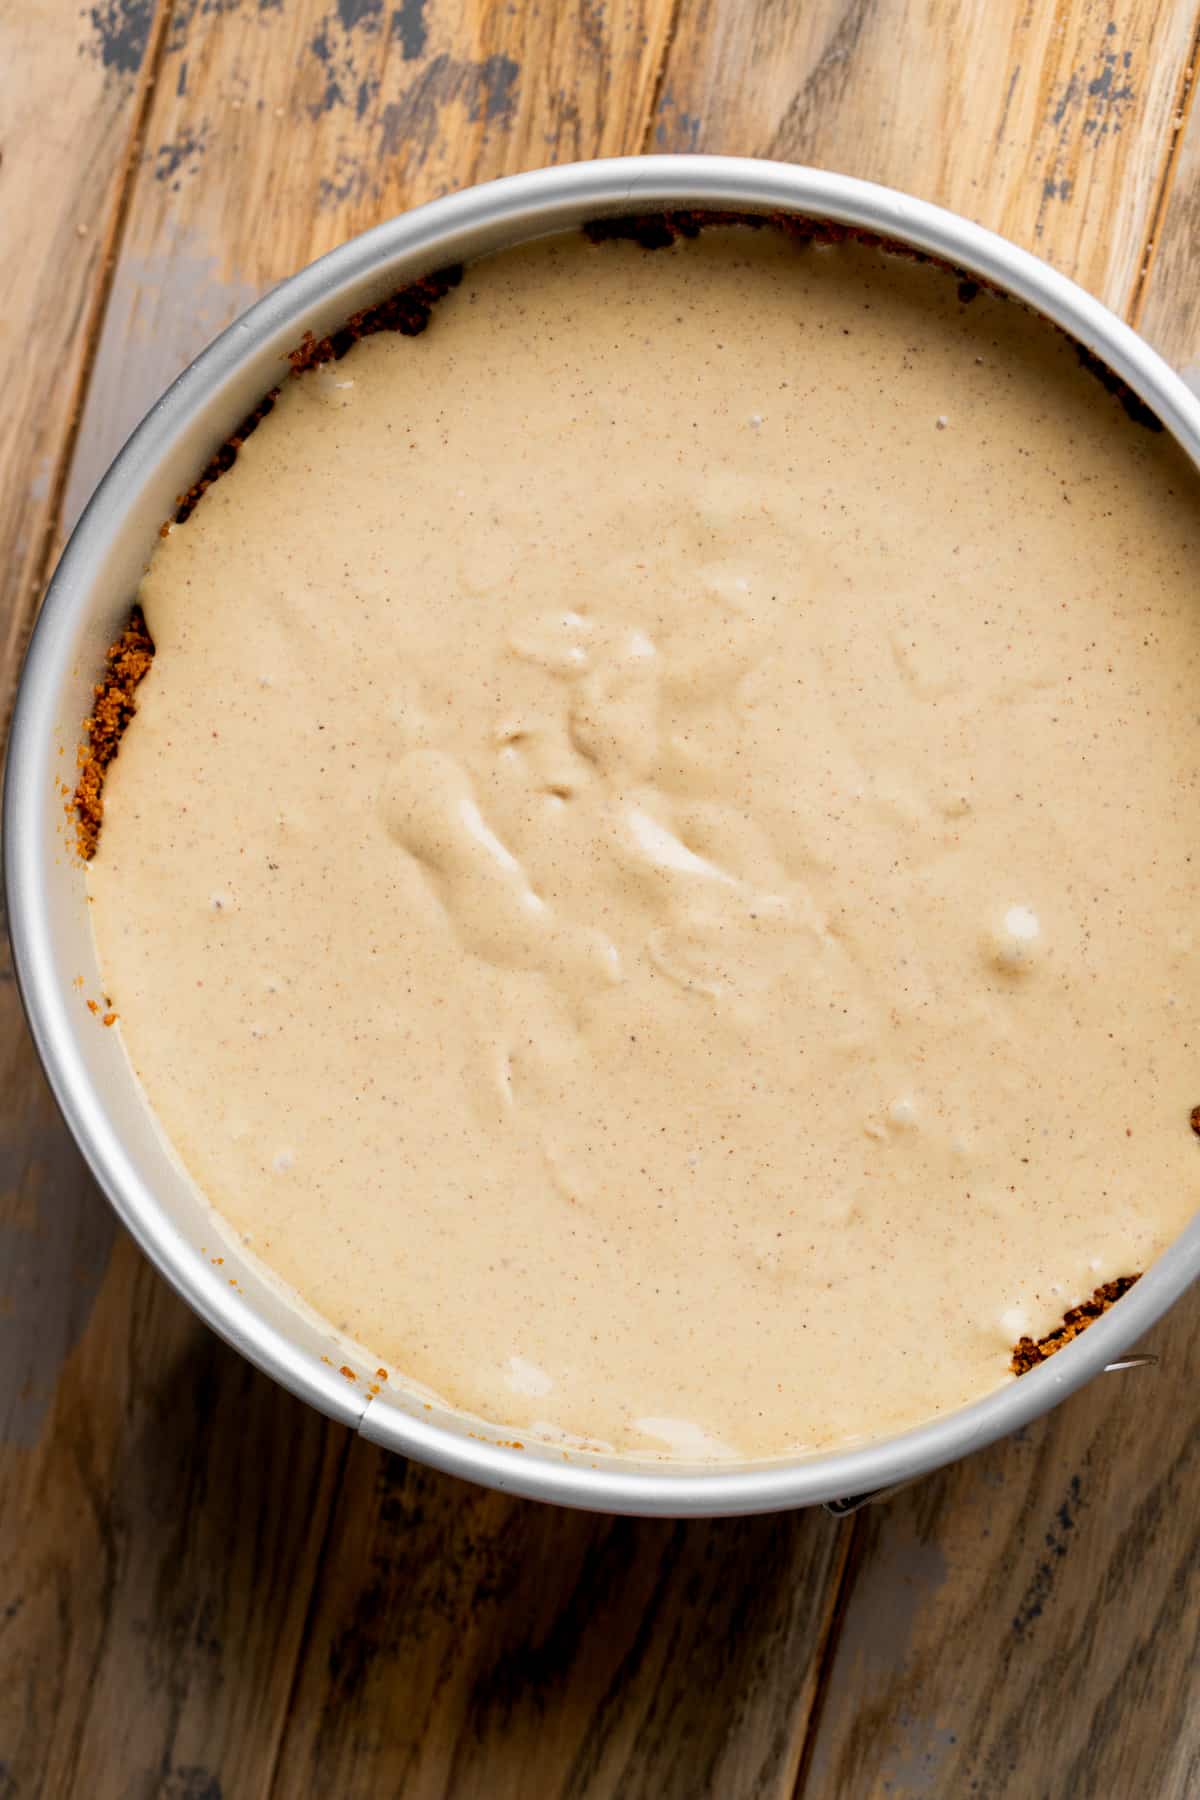 Cheesecake batter in a springform pan.